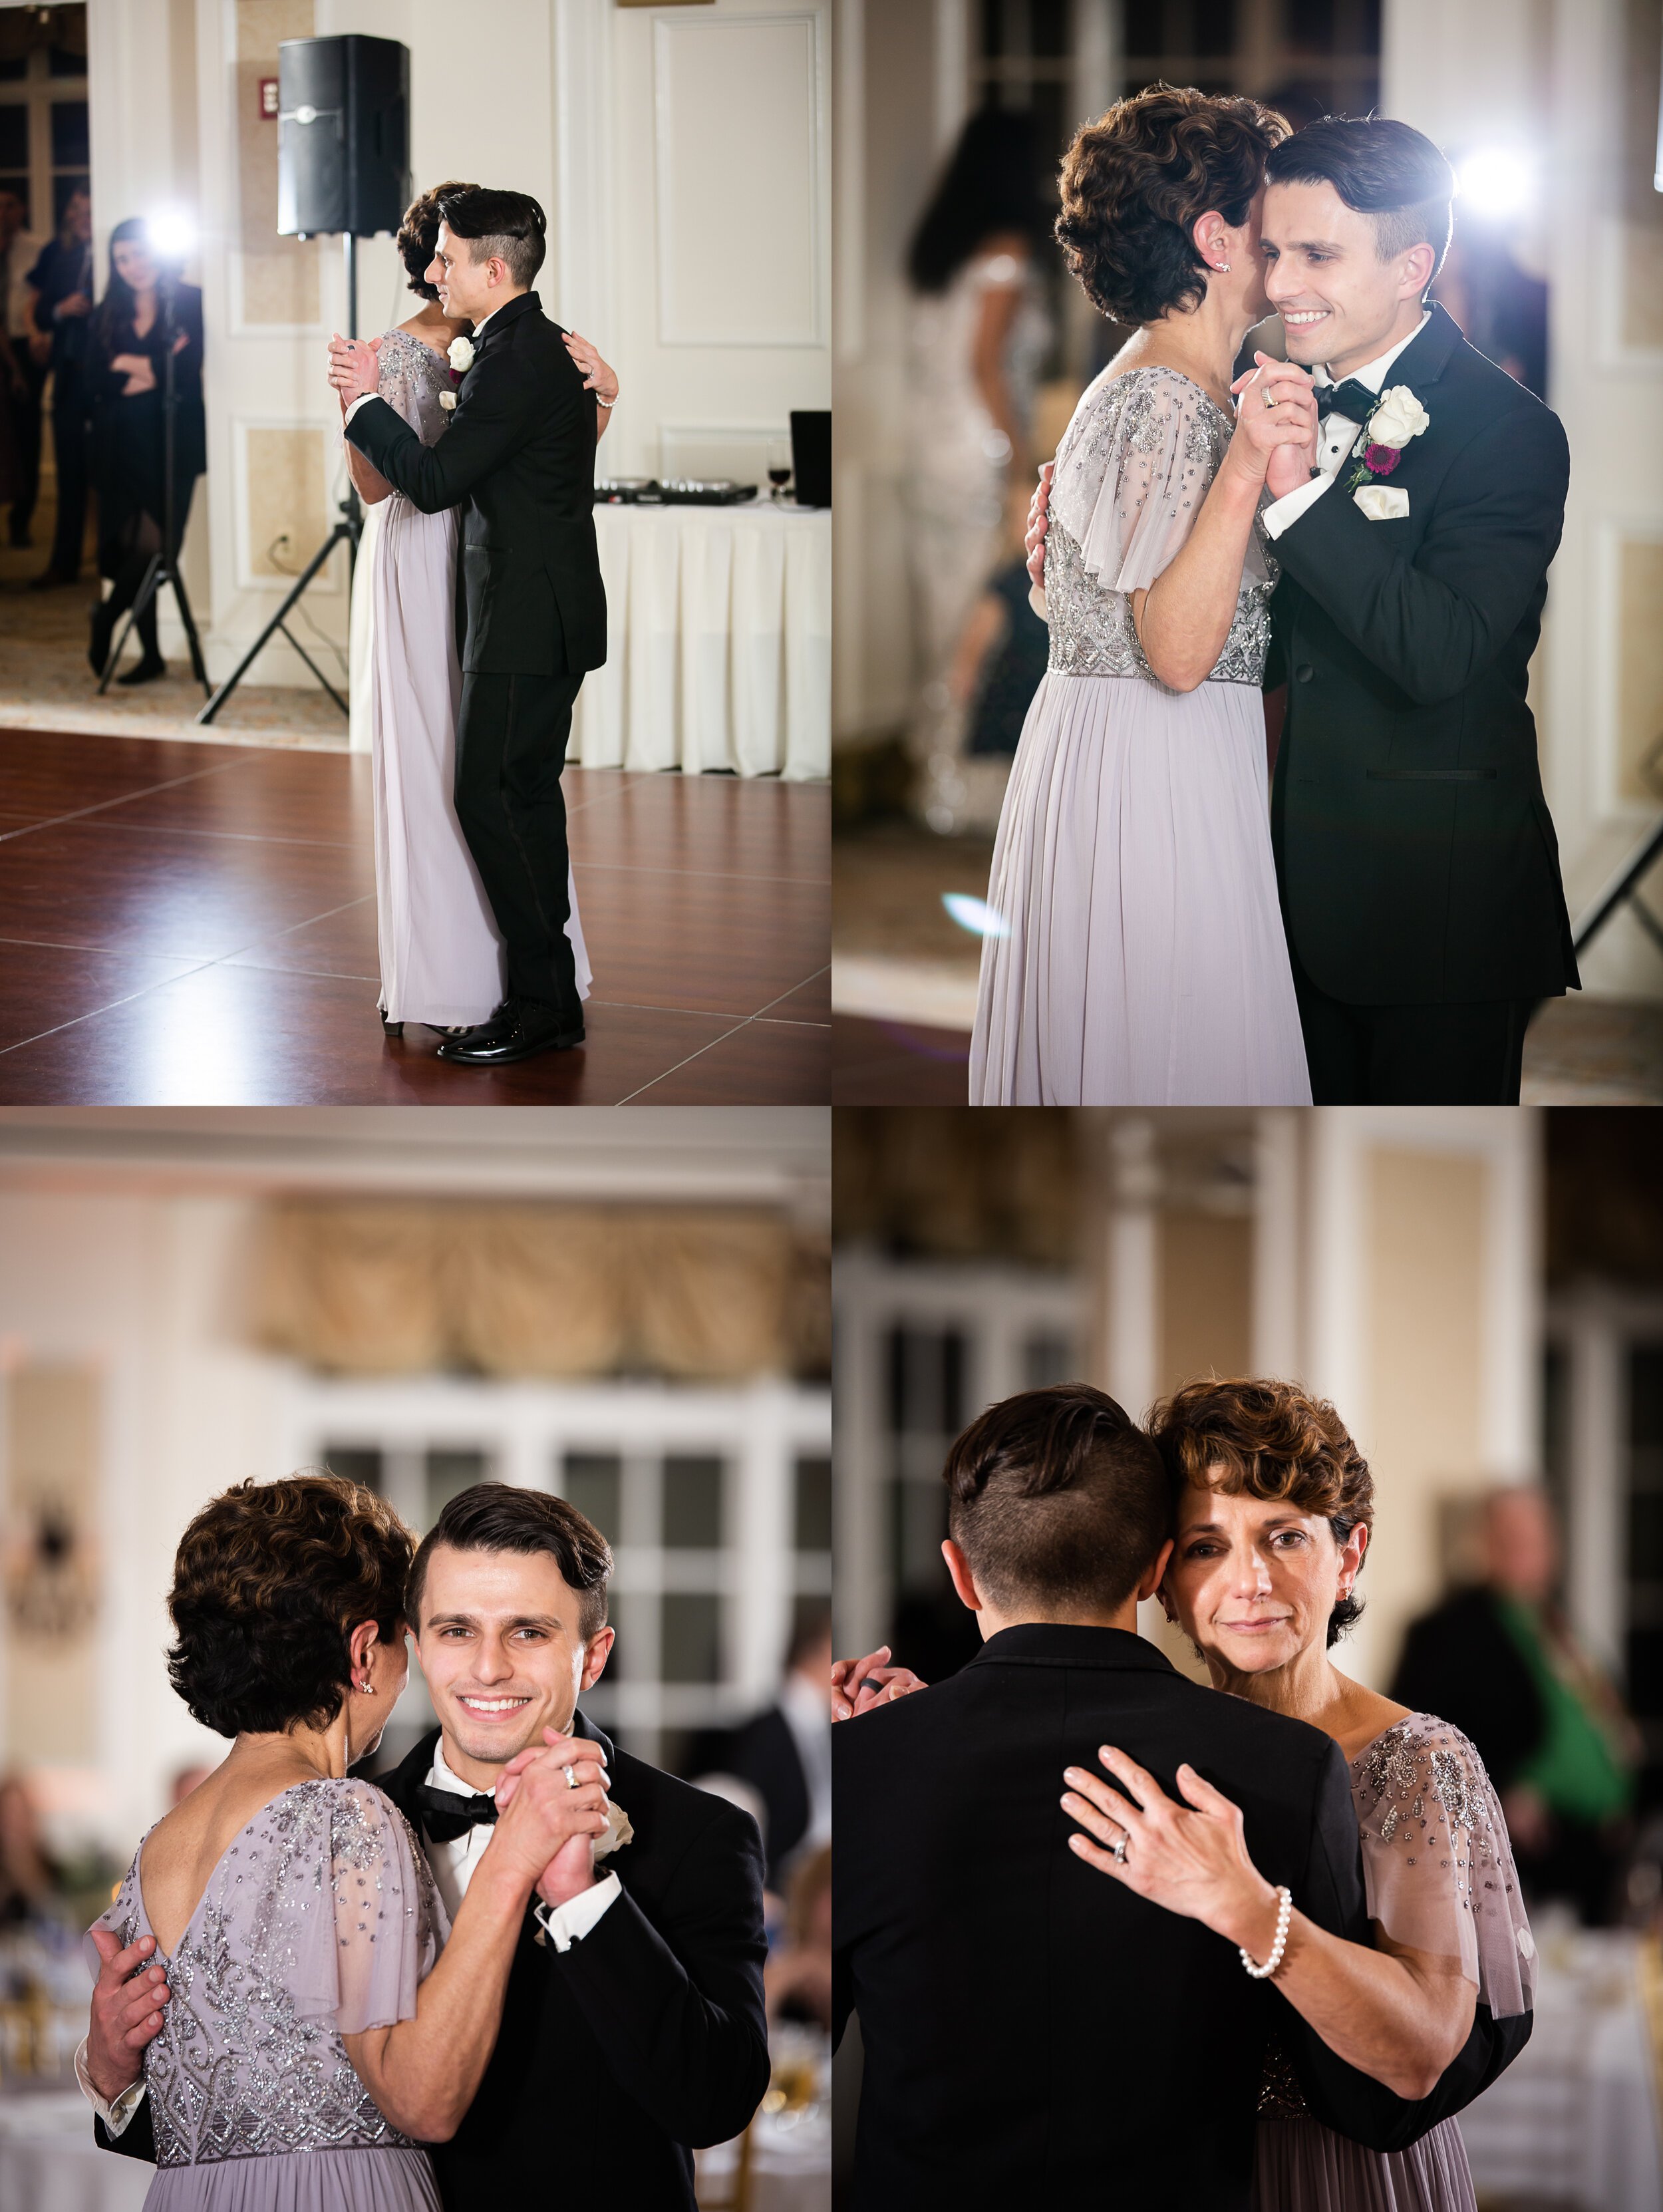 Manor Country Club wedding in Rockville MD  - mother son dance